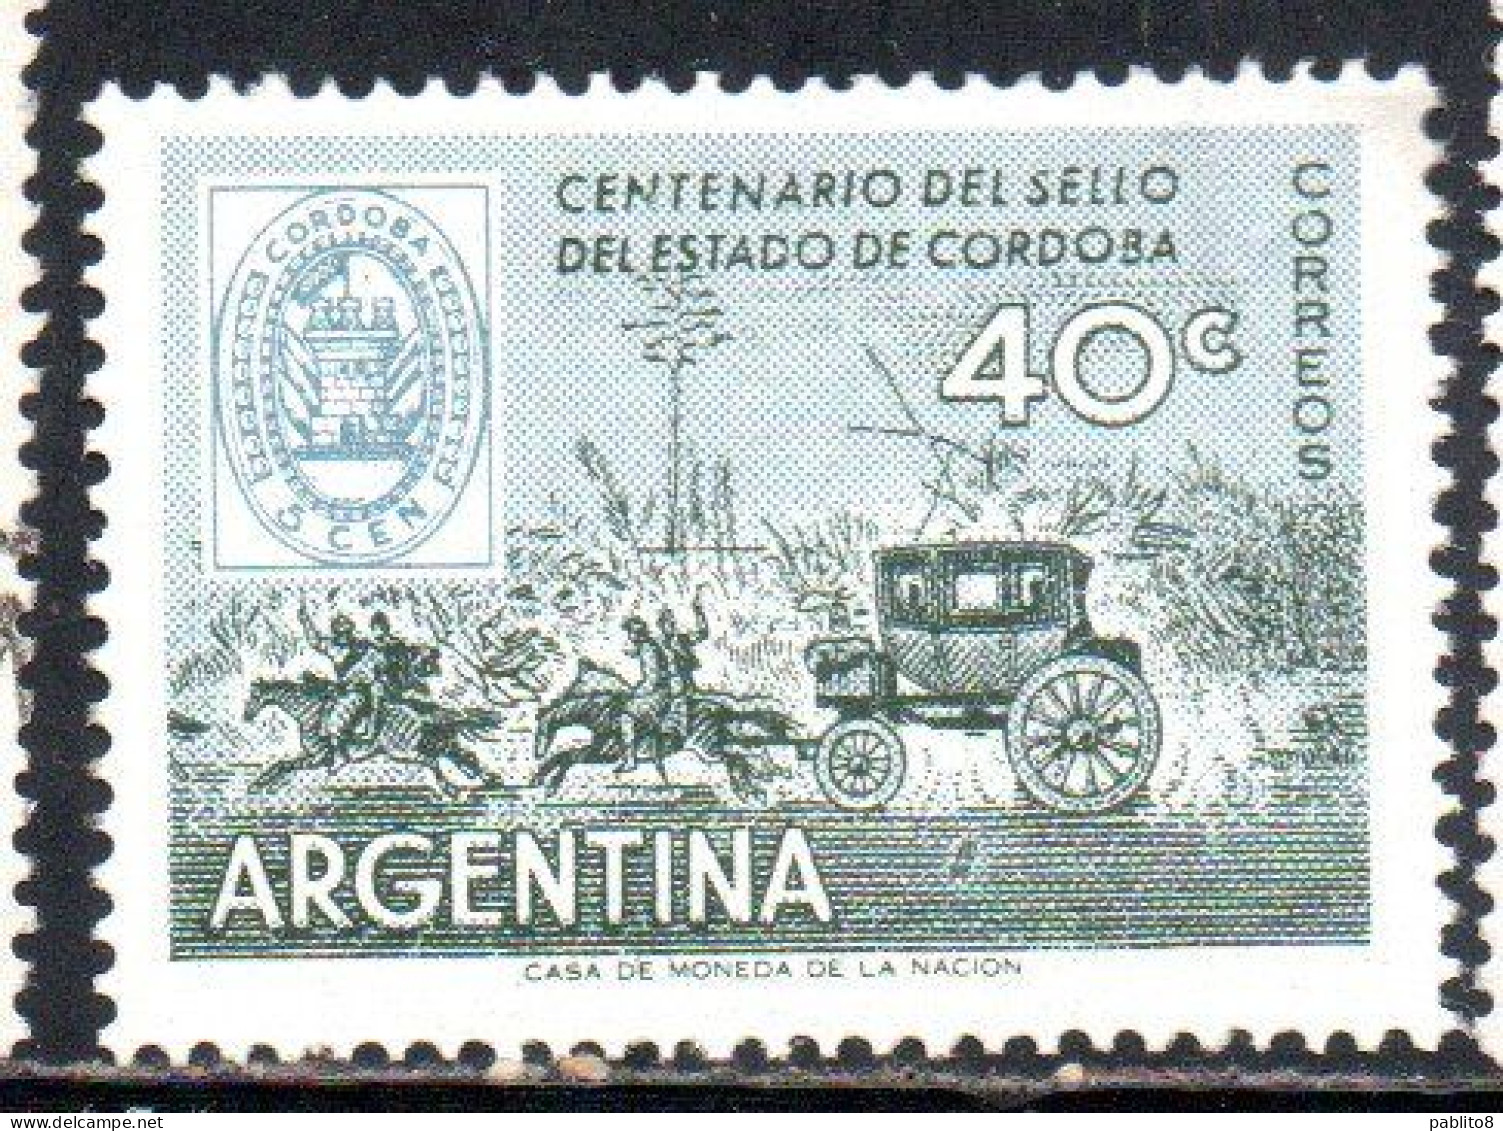 ARGENTINA 1958 CENTENARY OF CORDOBA POSTAGE STAMPS STAMP AND MAIL COACH 40c MNH - Nuevos